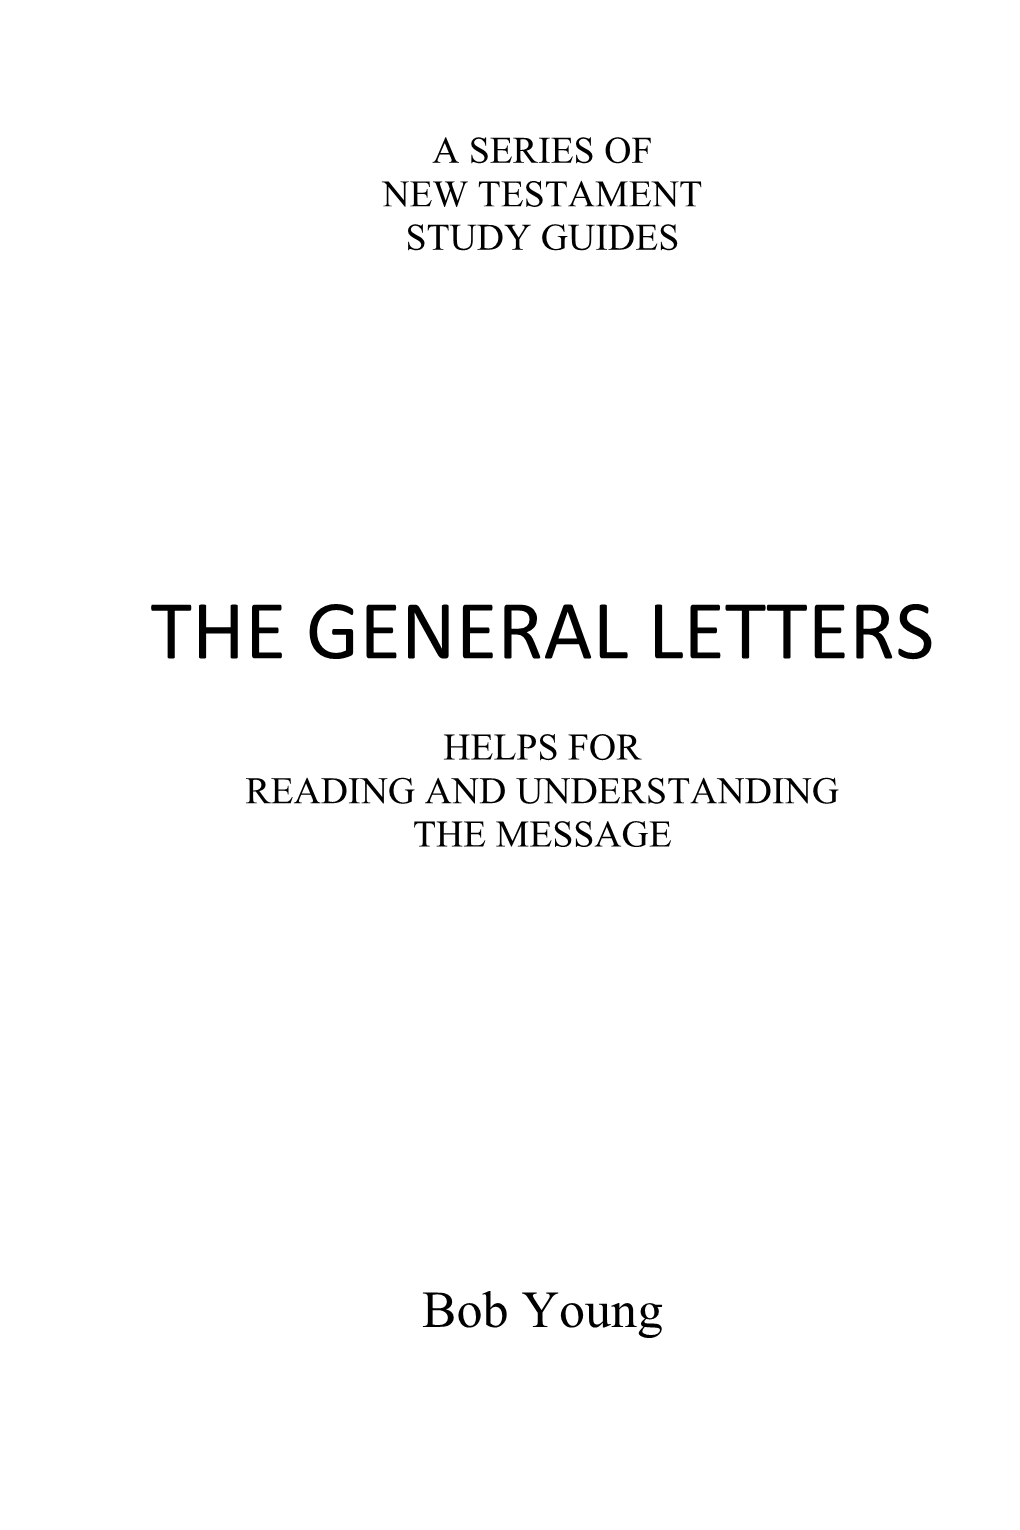 The General Letters